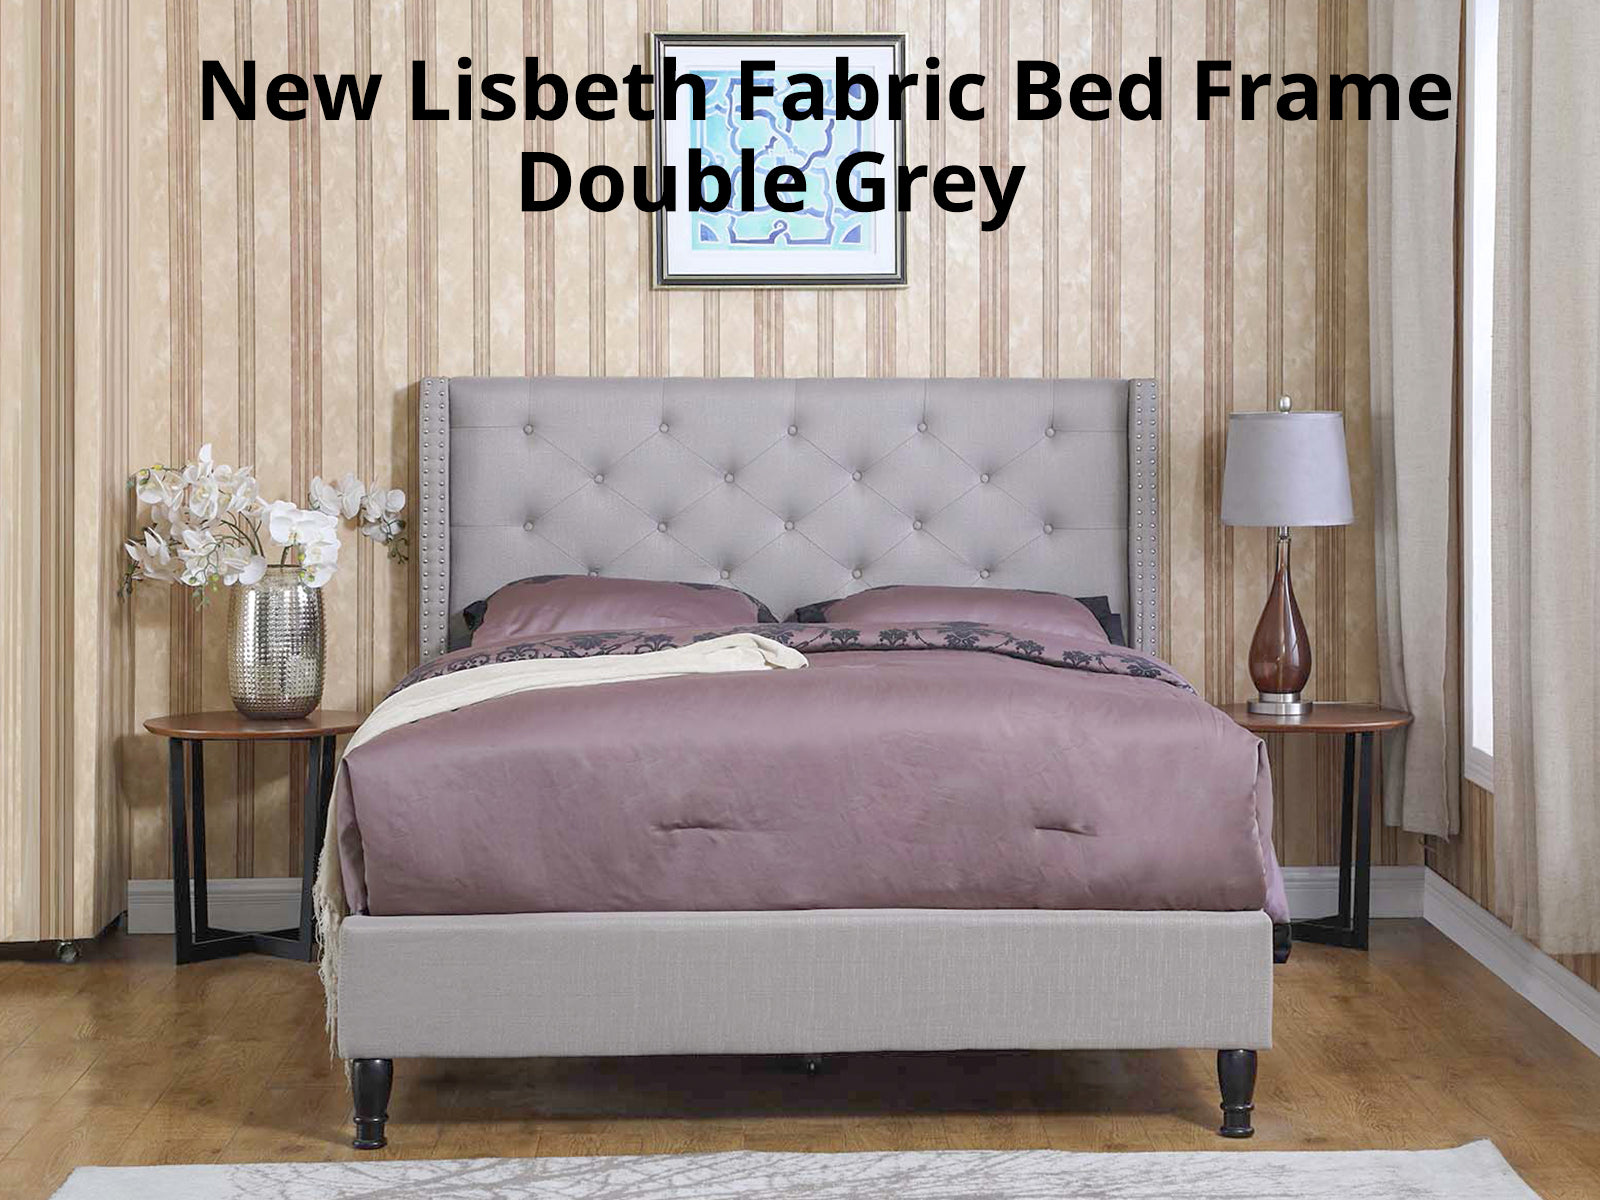 T New Lisbeth Fabric Bed Frame Double Grey